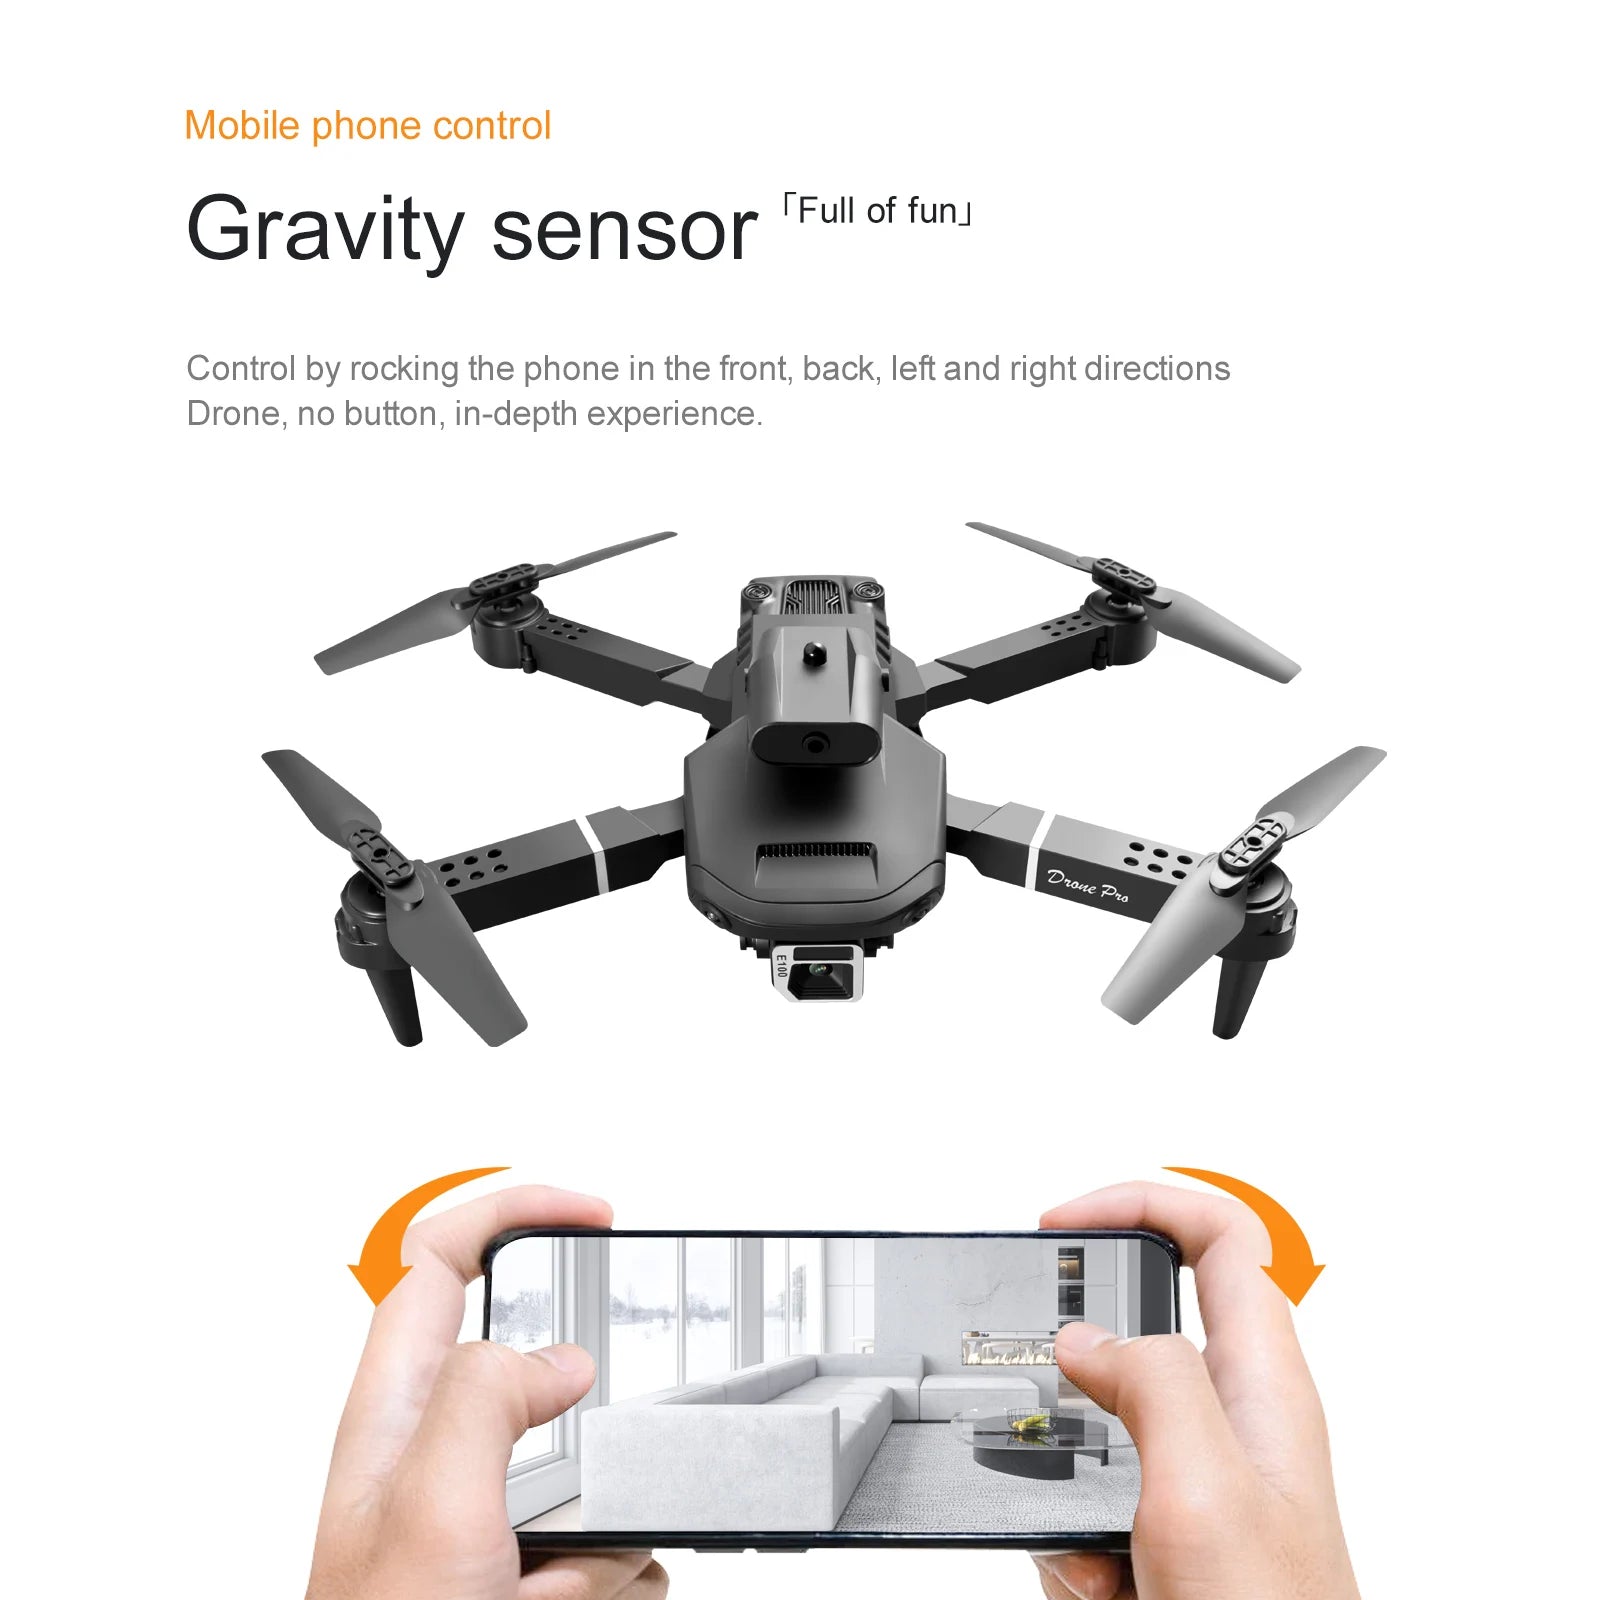 E100 Drone - 4K Dual HD Camera, E100 Drone, mobile phone control by rocking the phone in the front; back;